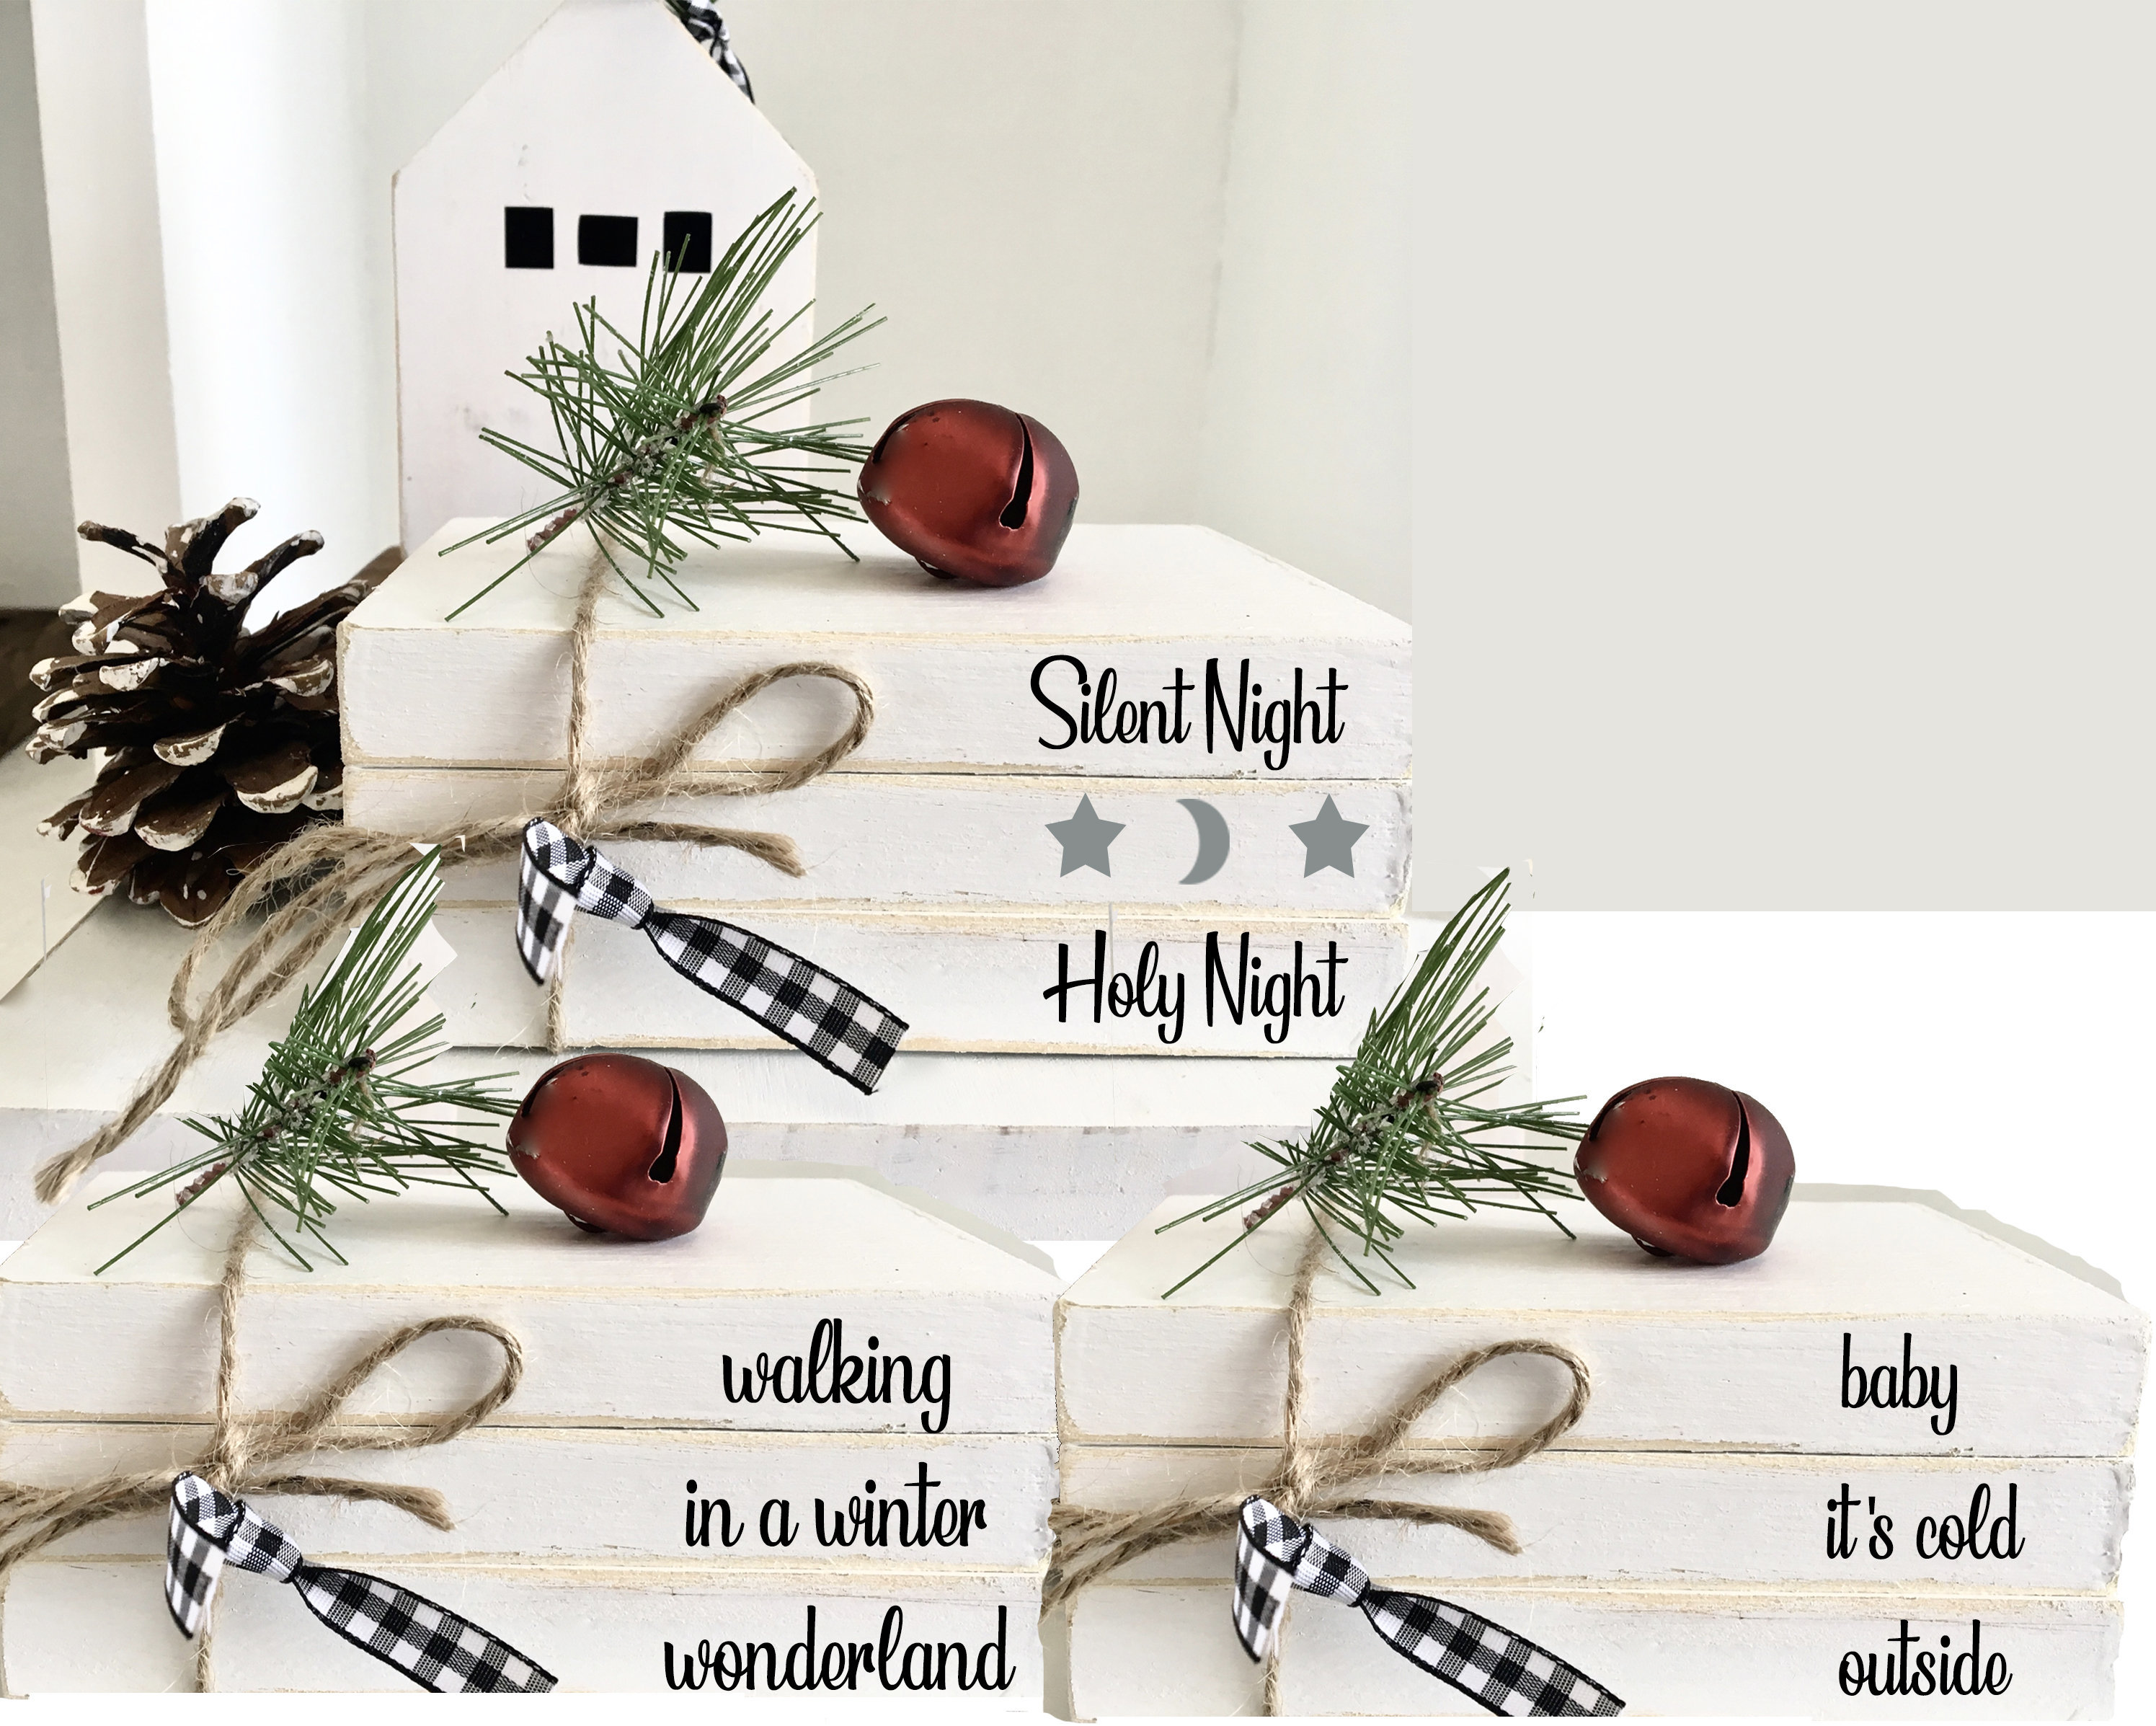  WODOHOLO 5Pcs Christmas Wooden Tiered Tray Decor, Winter Wooden  Book Stacks Bundle with Snowflake Table Decor, Blue Xmas Rustic Farmhouse  Tabletop Centerpieces Home Kitchen Decoration : Home & Kitchen